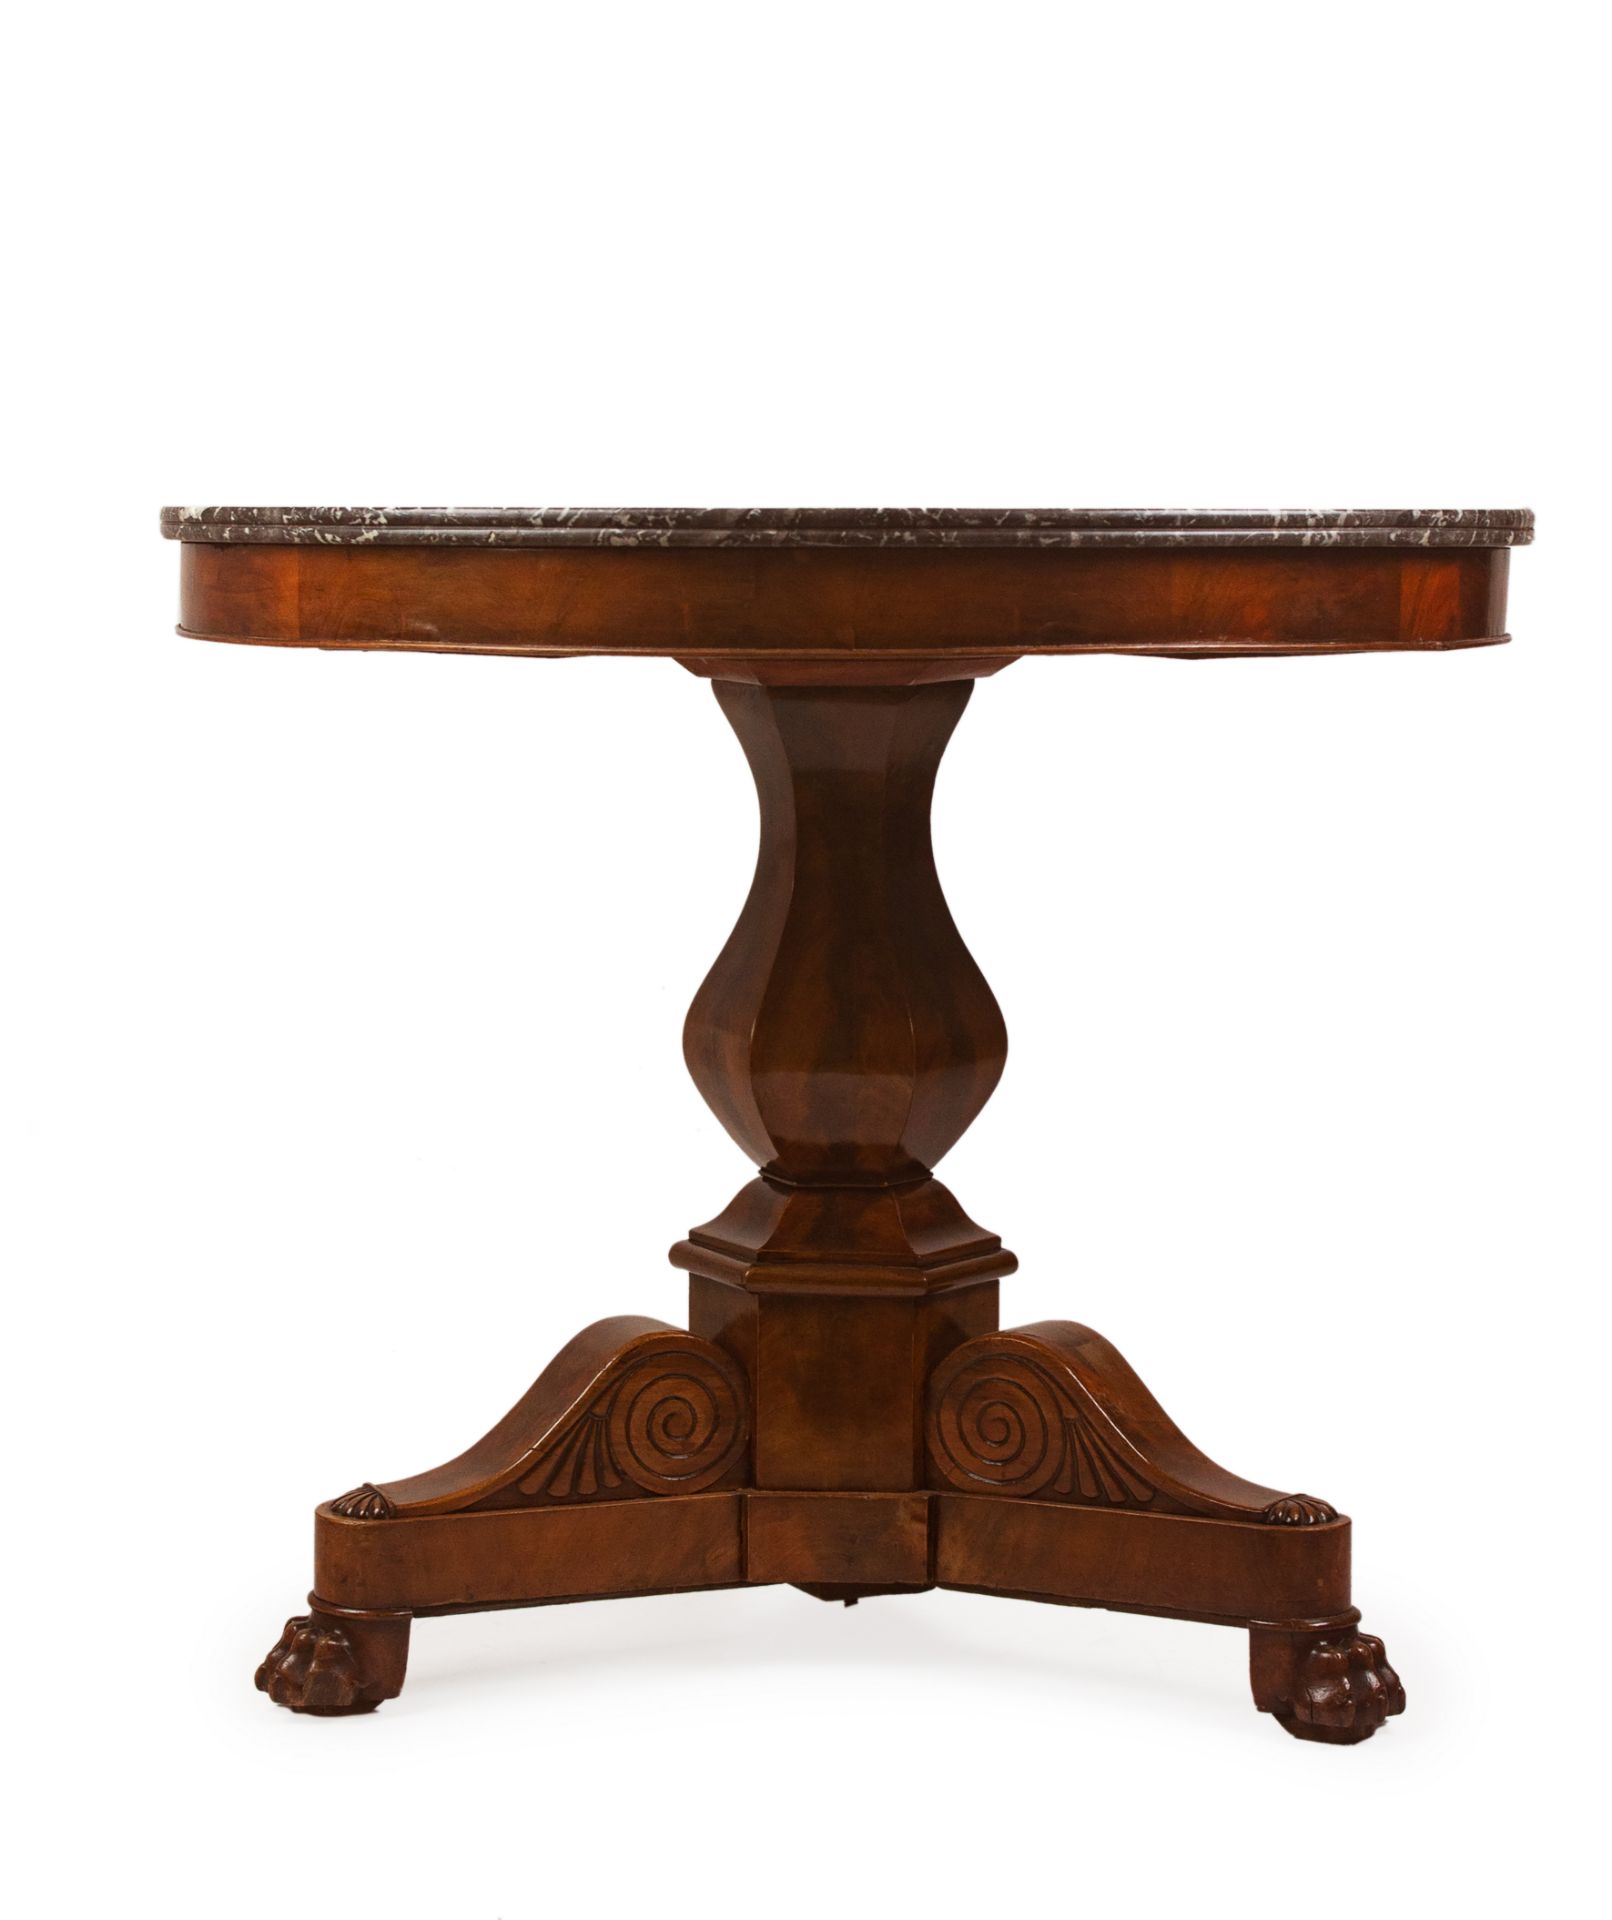 A 19th century Charles X period French guéridon walnut table - Image 2 of 3